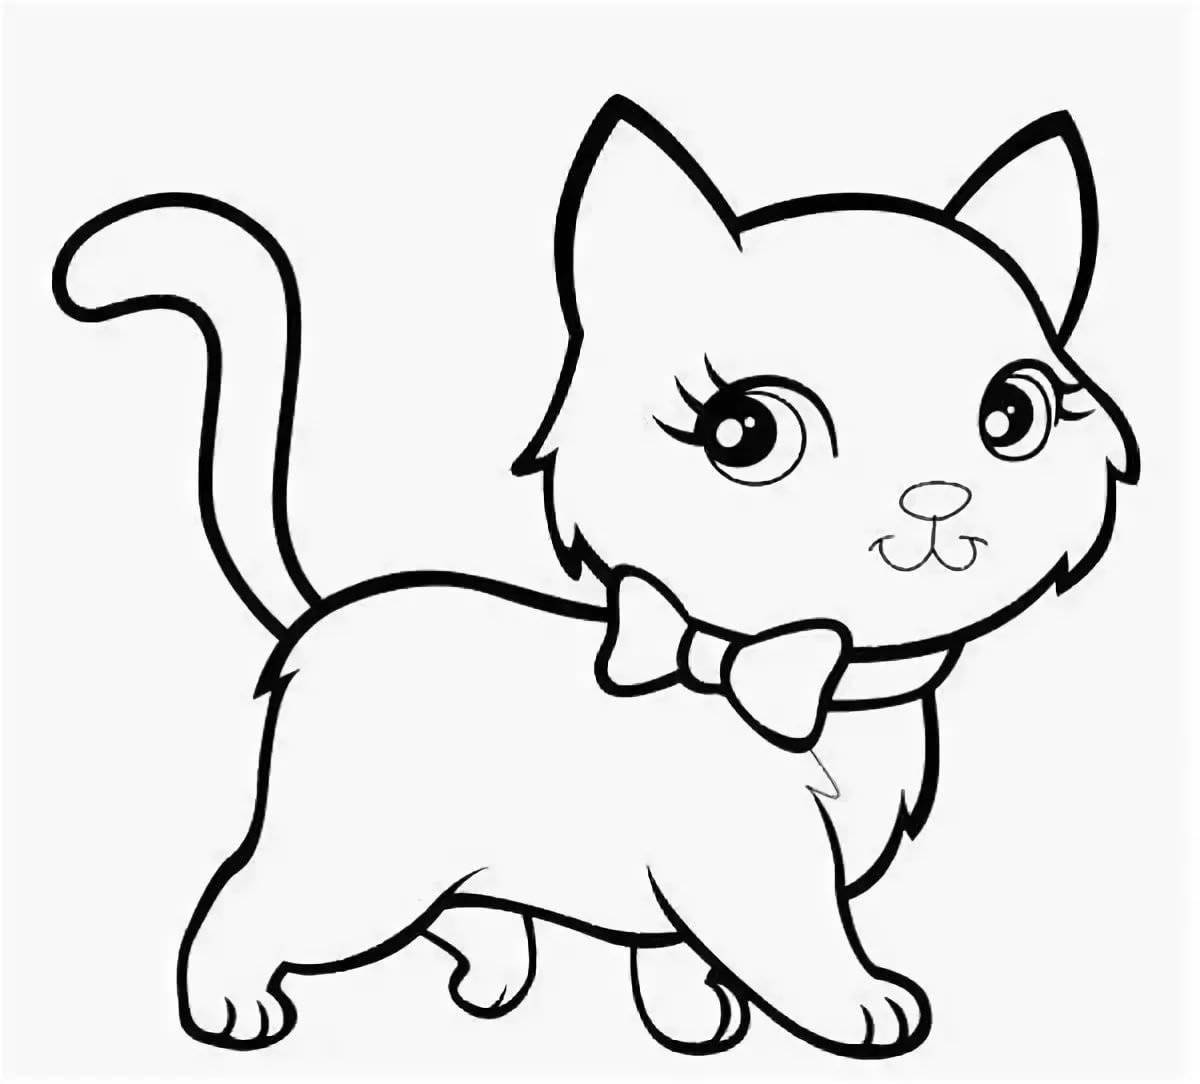 Shining kitty coloring book for children 4-5 years old